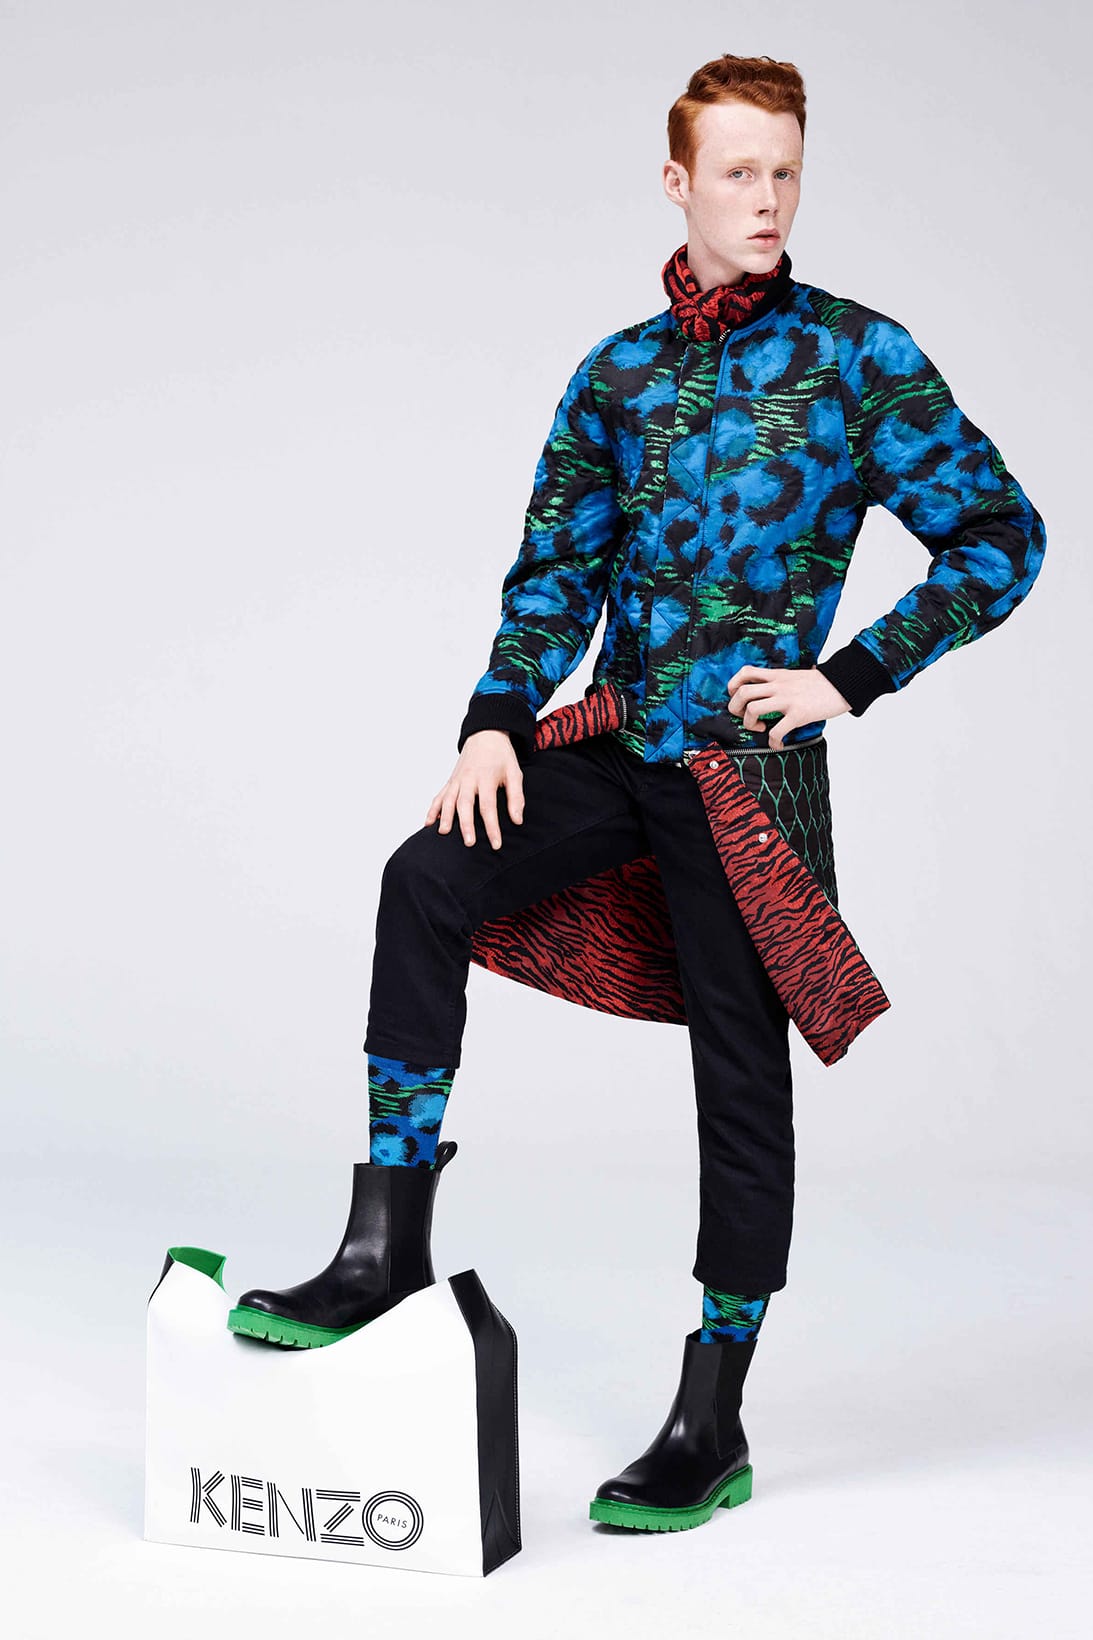 h&m kenzo collection